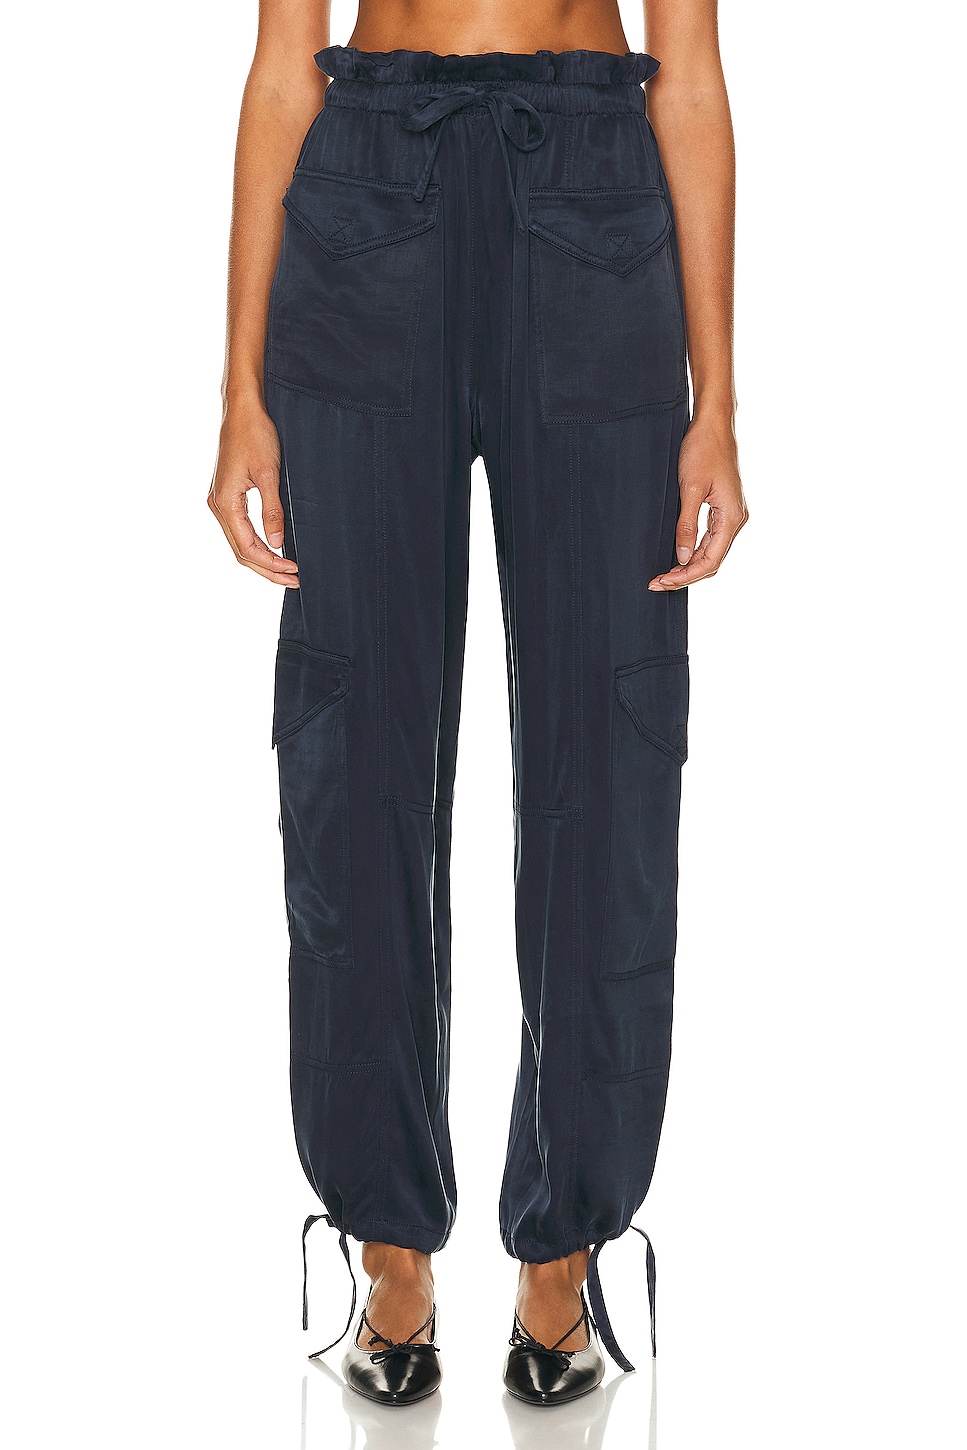 Image 1 of Ganni High Waisted Pant in Sky Captain